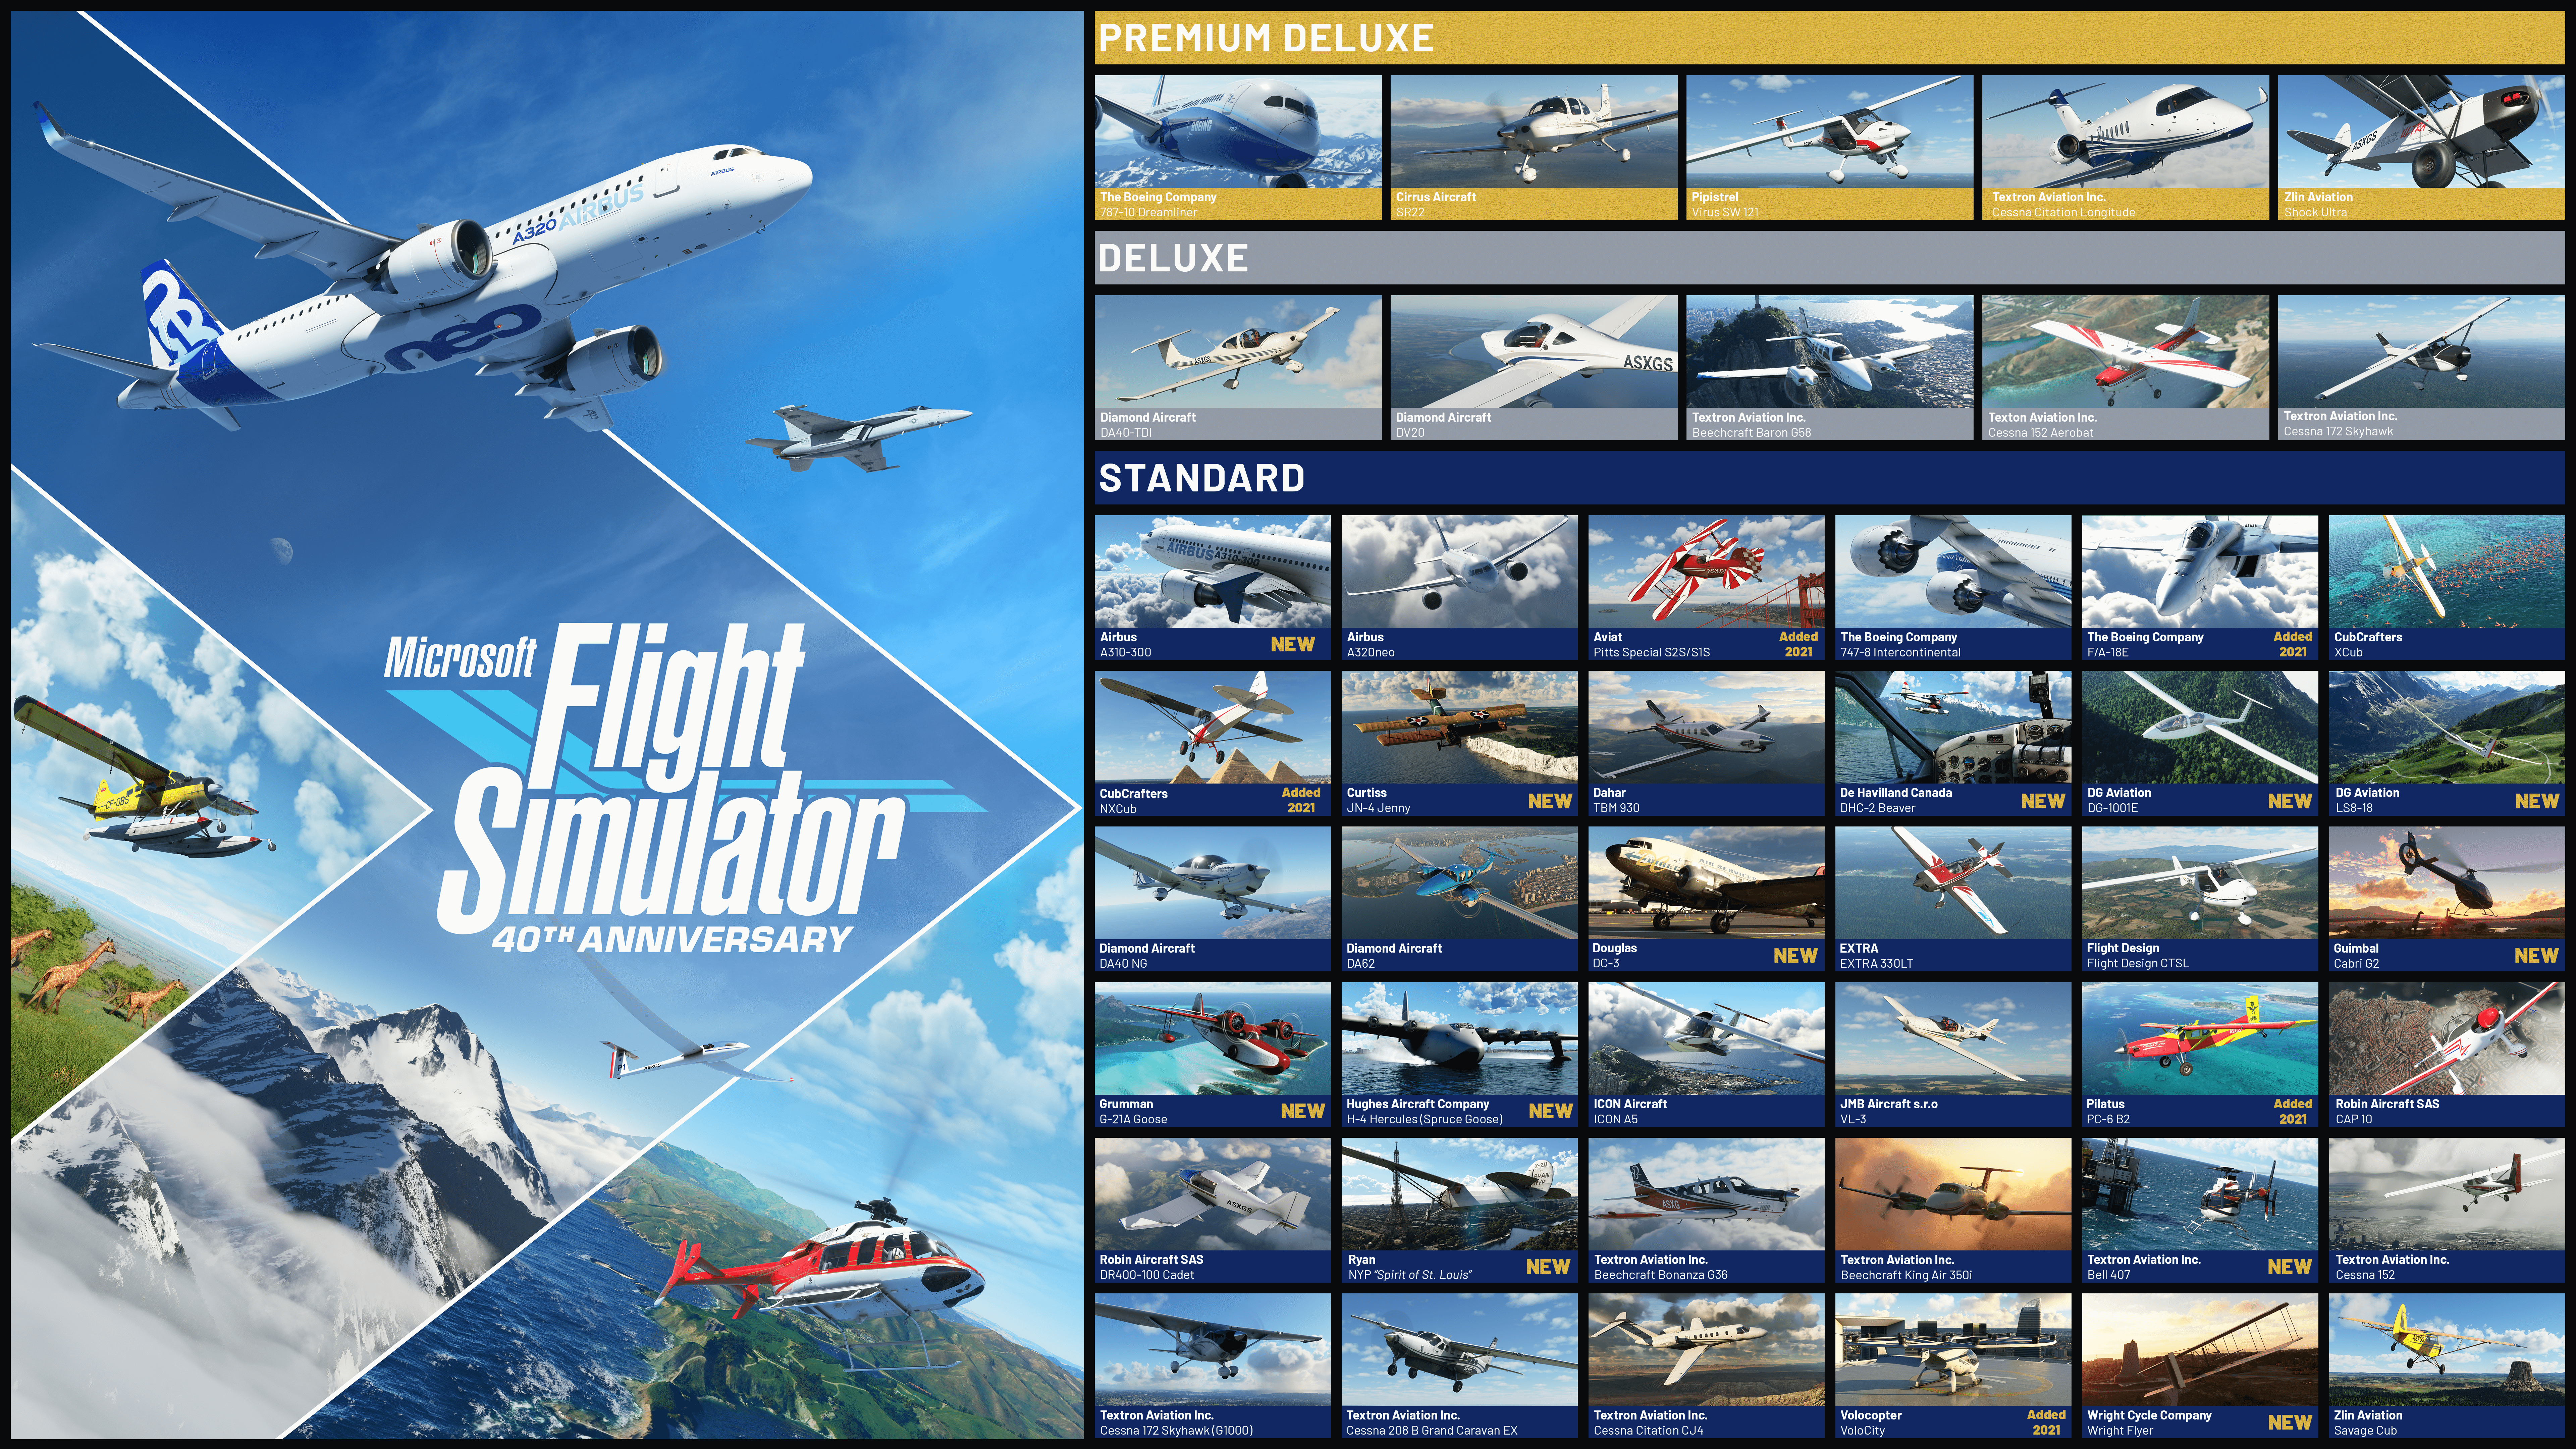 List of all aircraft for each edition of Microsoft Flight Simulator